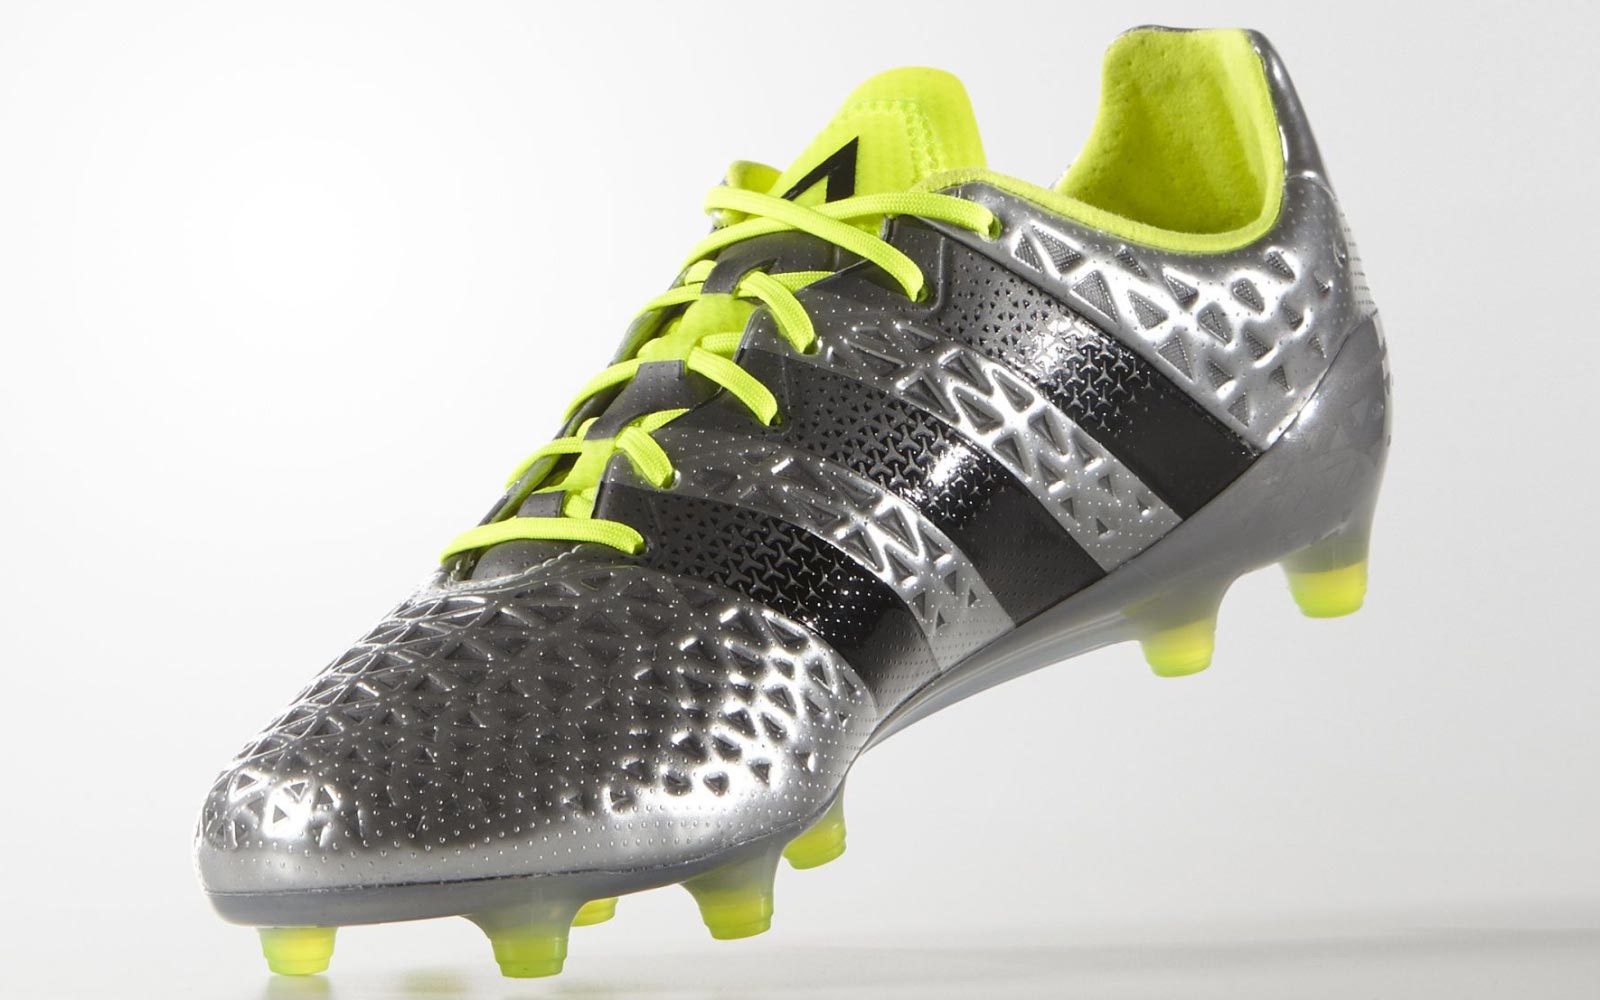 Adidas Ace Euro 16.1 2016 Boots Released - Footy Headlines